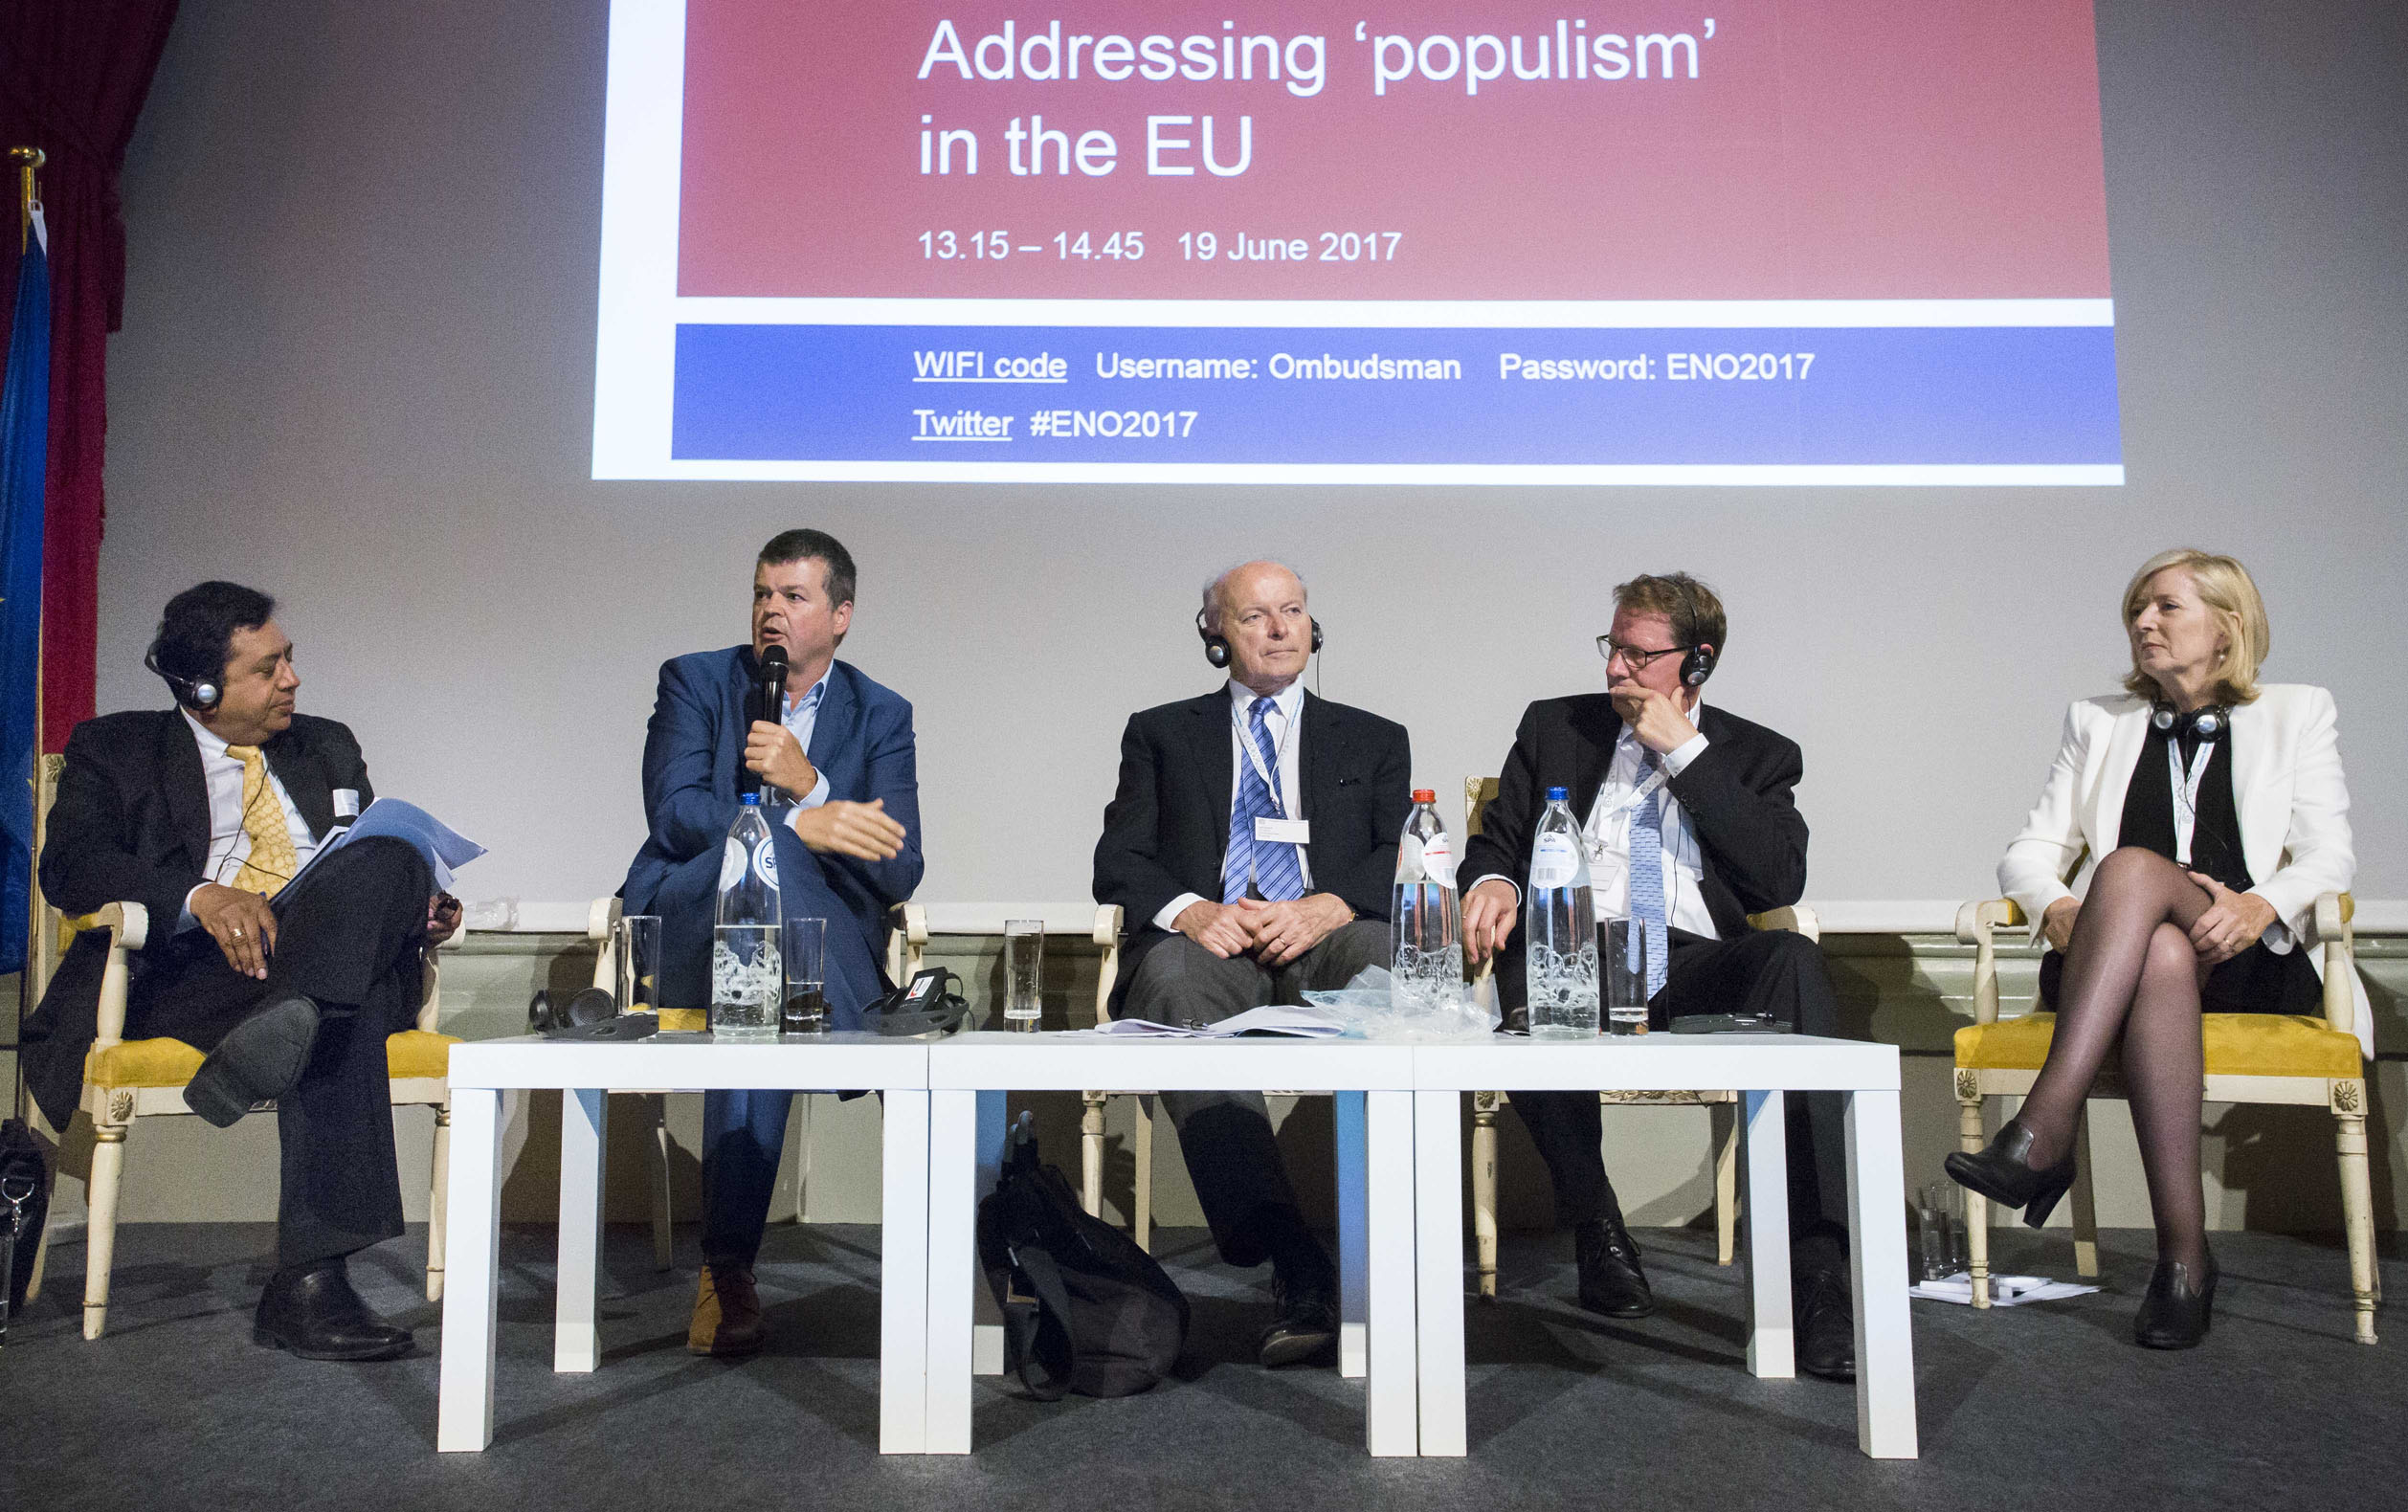 The panellists of the first session of the 2017 conference of the European Network of Ombudsmen (left to right): Sanjay Pradhan, Chief Executive Officer, Open Government Partnership; Bart Somers, Mayor of Mechelen in Belgium; Jacques Toubon, Defender of Rights of France; Gero Storjohann, Deputy Chair of the German Federal Petitions Committee; and Emily O’Reilly, European Ombudsman.